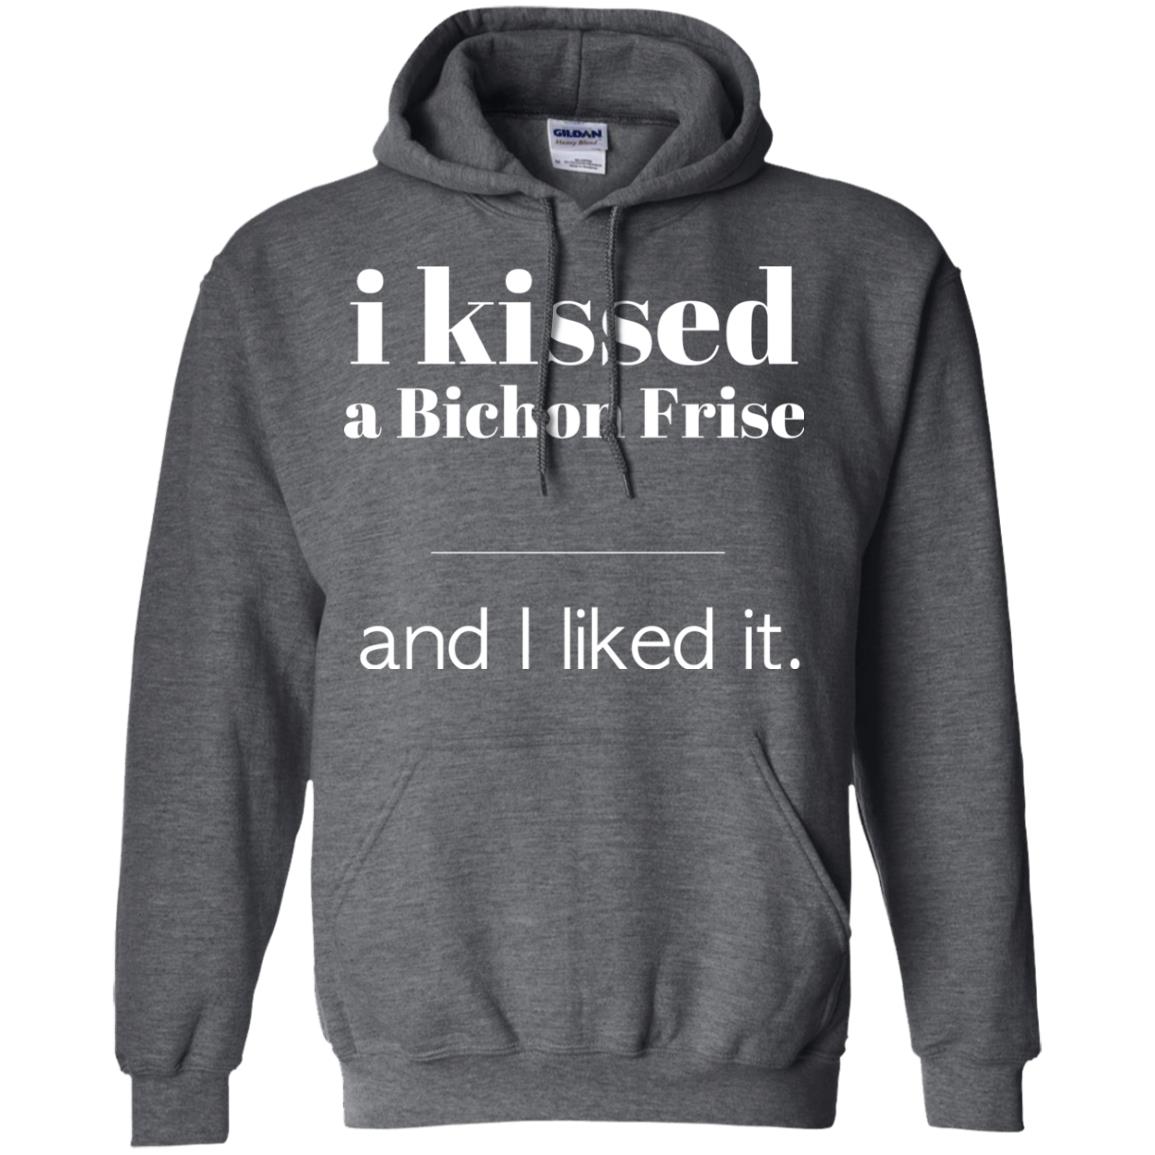 I Kissed A Bichon Frise Pullover Hoodie